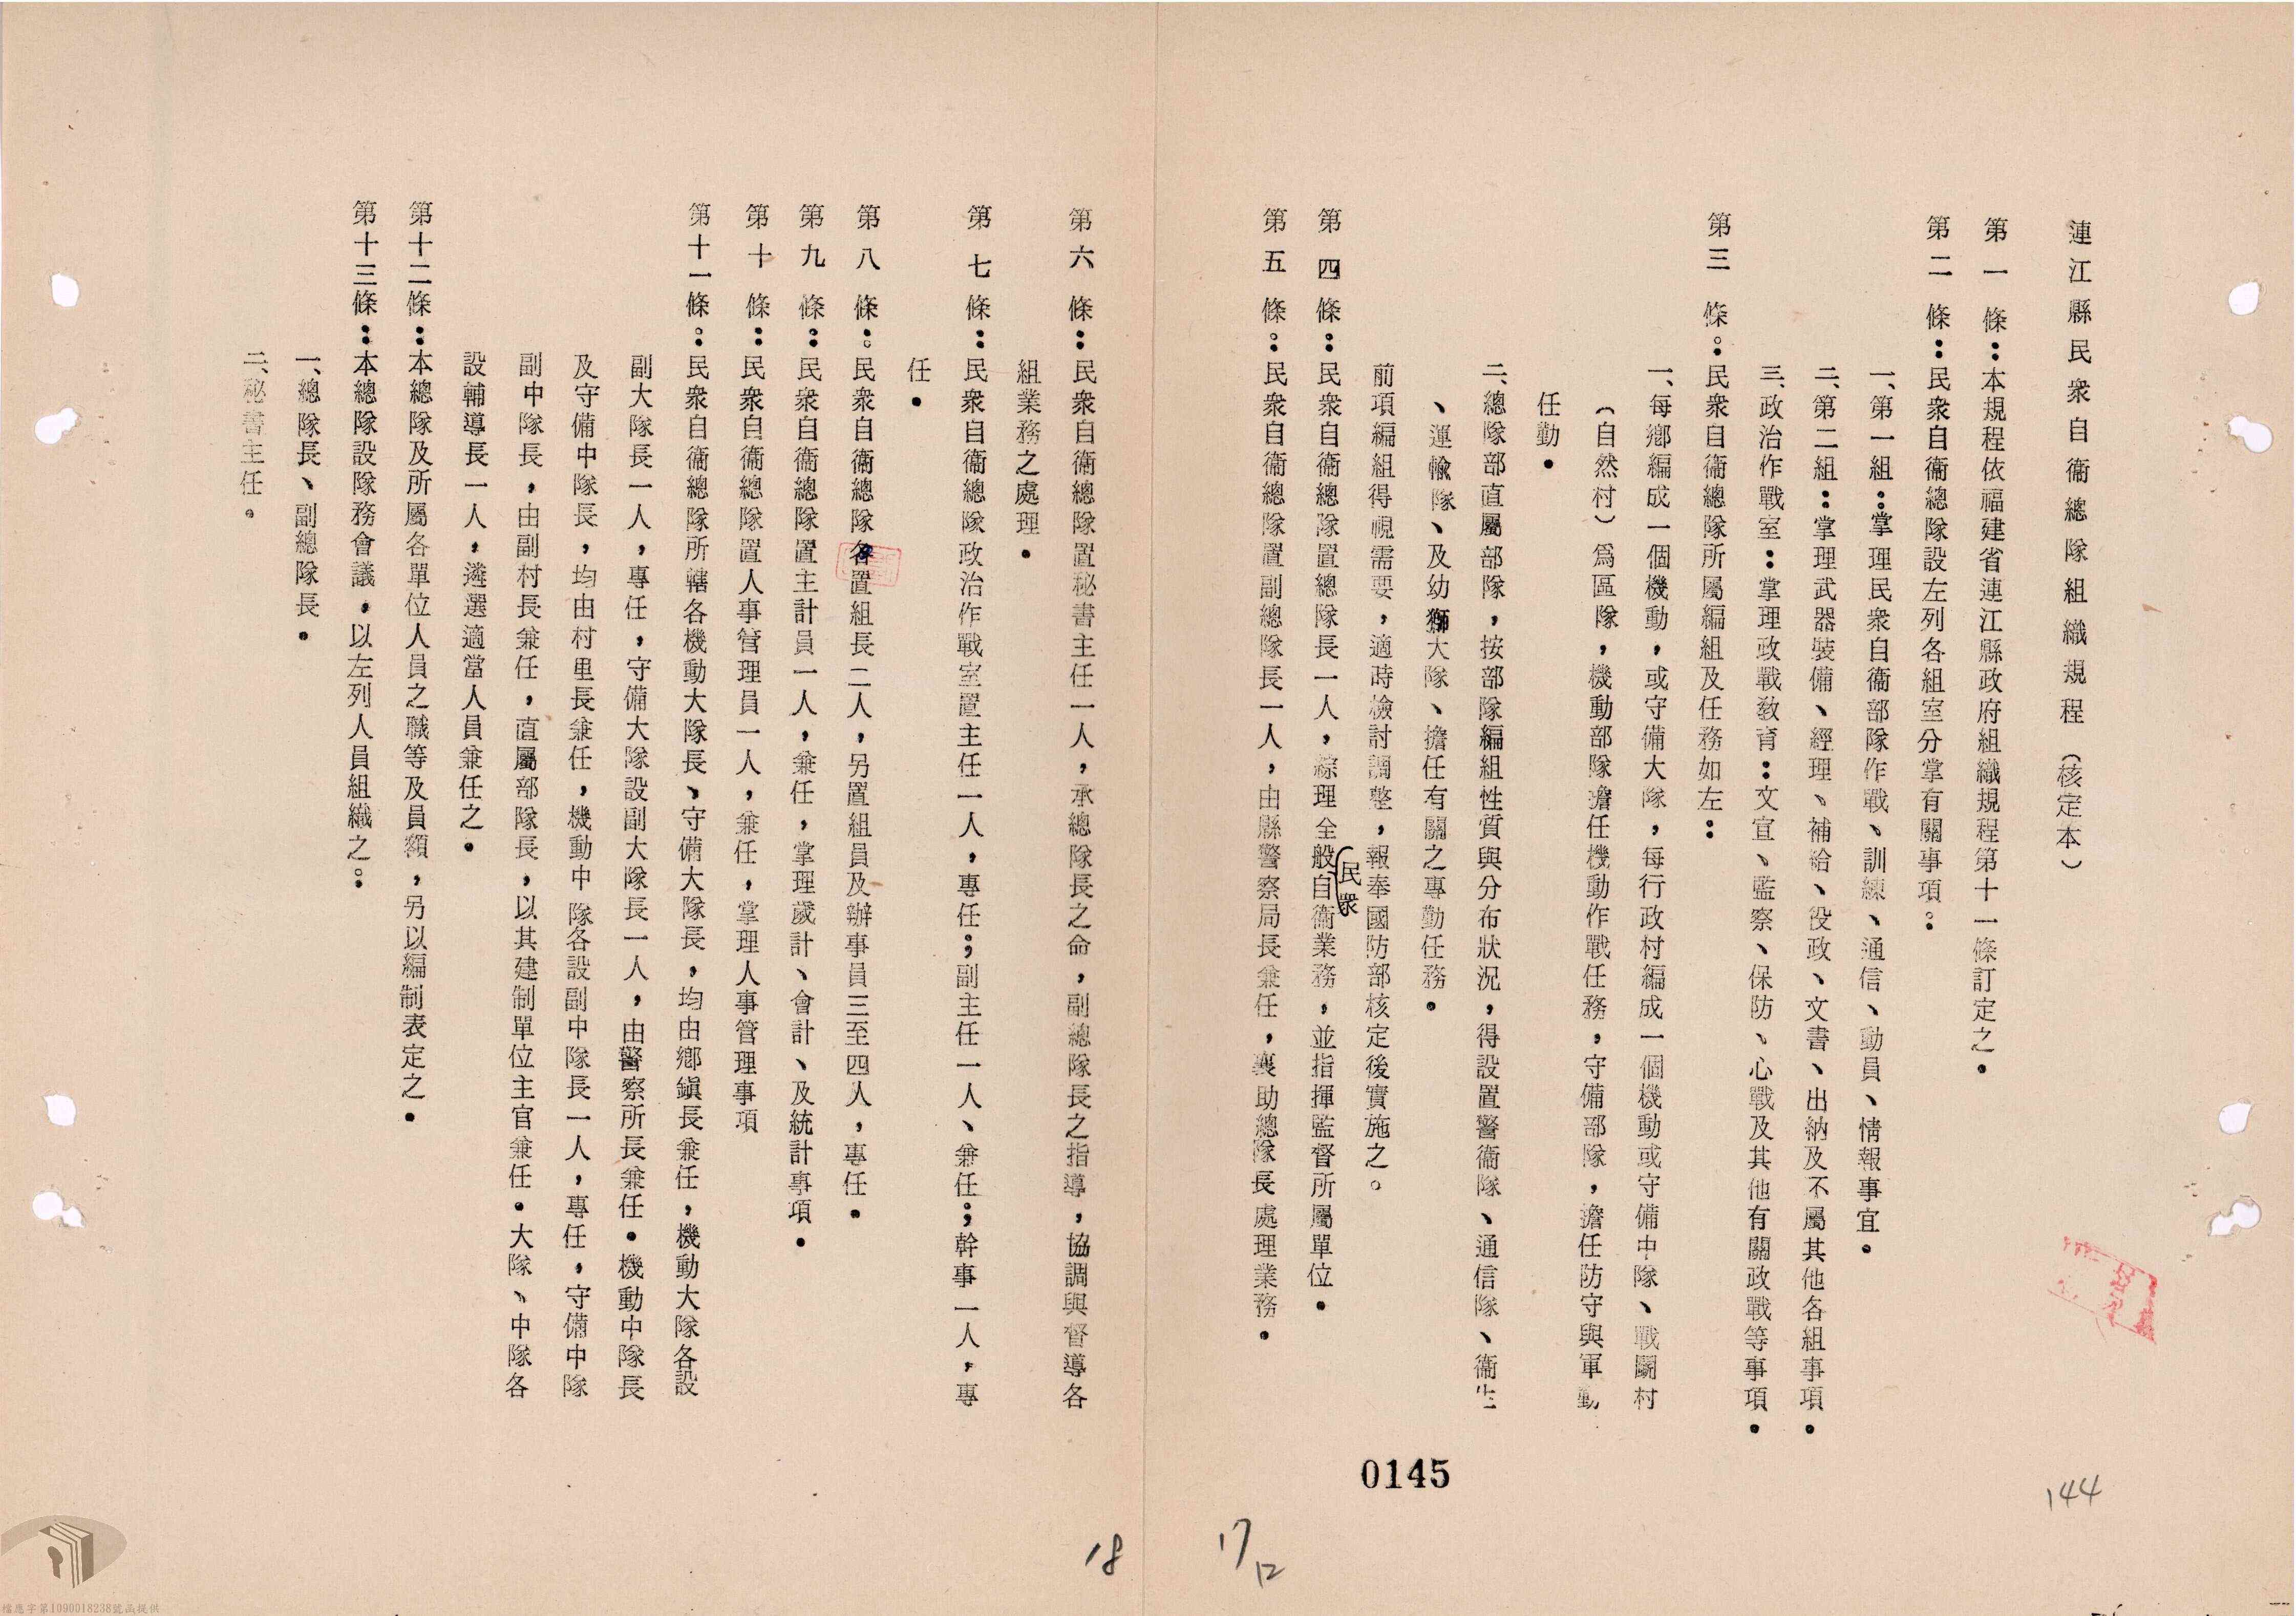 April 1975, Organizational Regulations of the Civil Self-Defense Forces of Lienchiang County during the period of military administration.